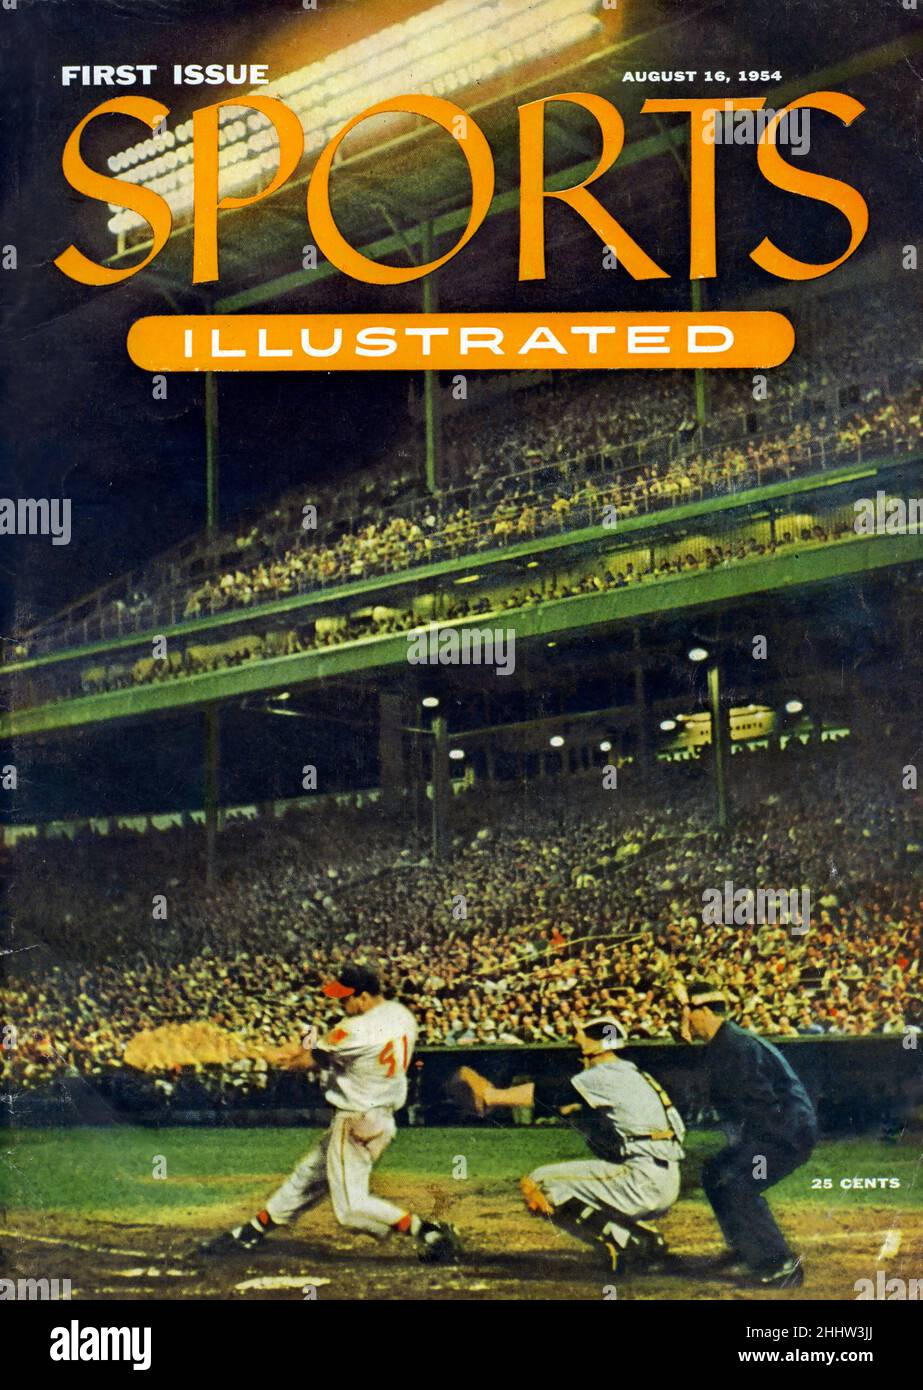 2010-Now Sports Illustrated magazine full back issue CHOOSE YOUR PLAYER TEAM 